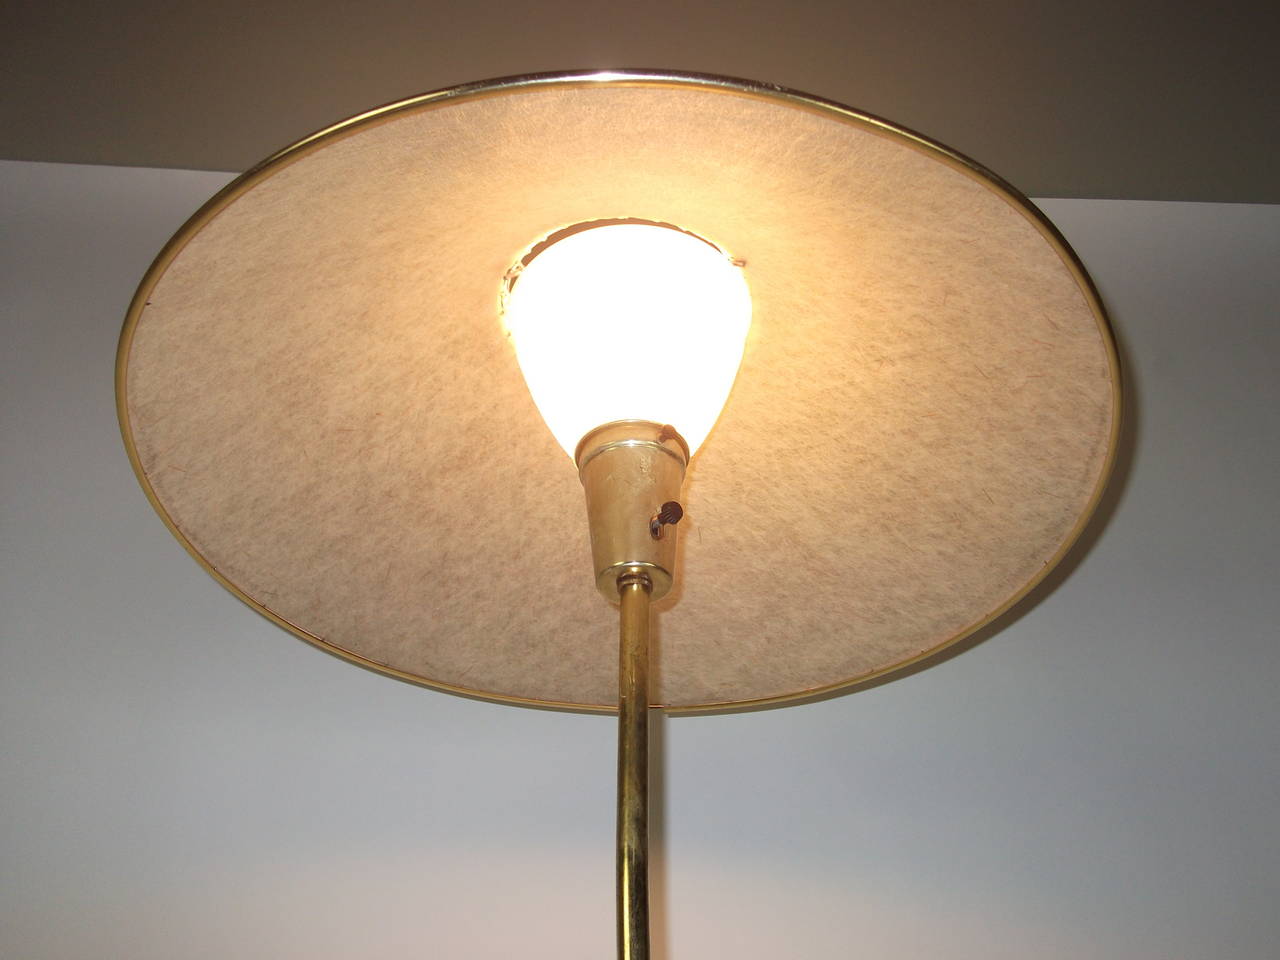 Mid-Century Modern 1950s Adjustable Floor Lamp Attributed to Gerald Thurston for Lightolier For Sale